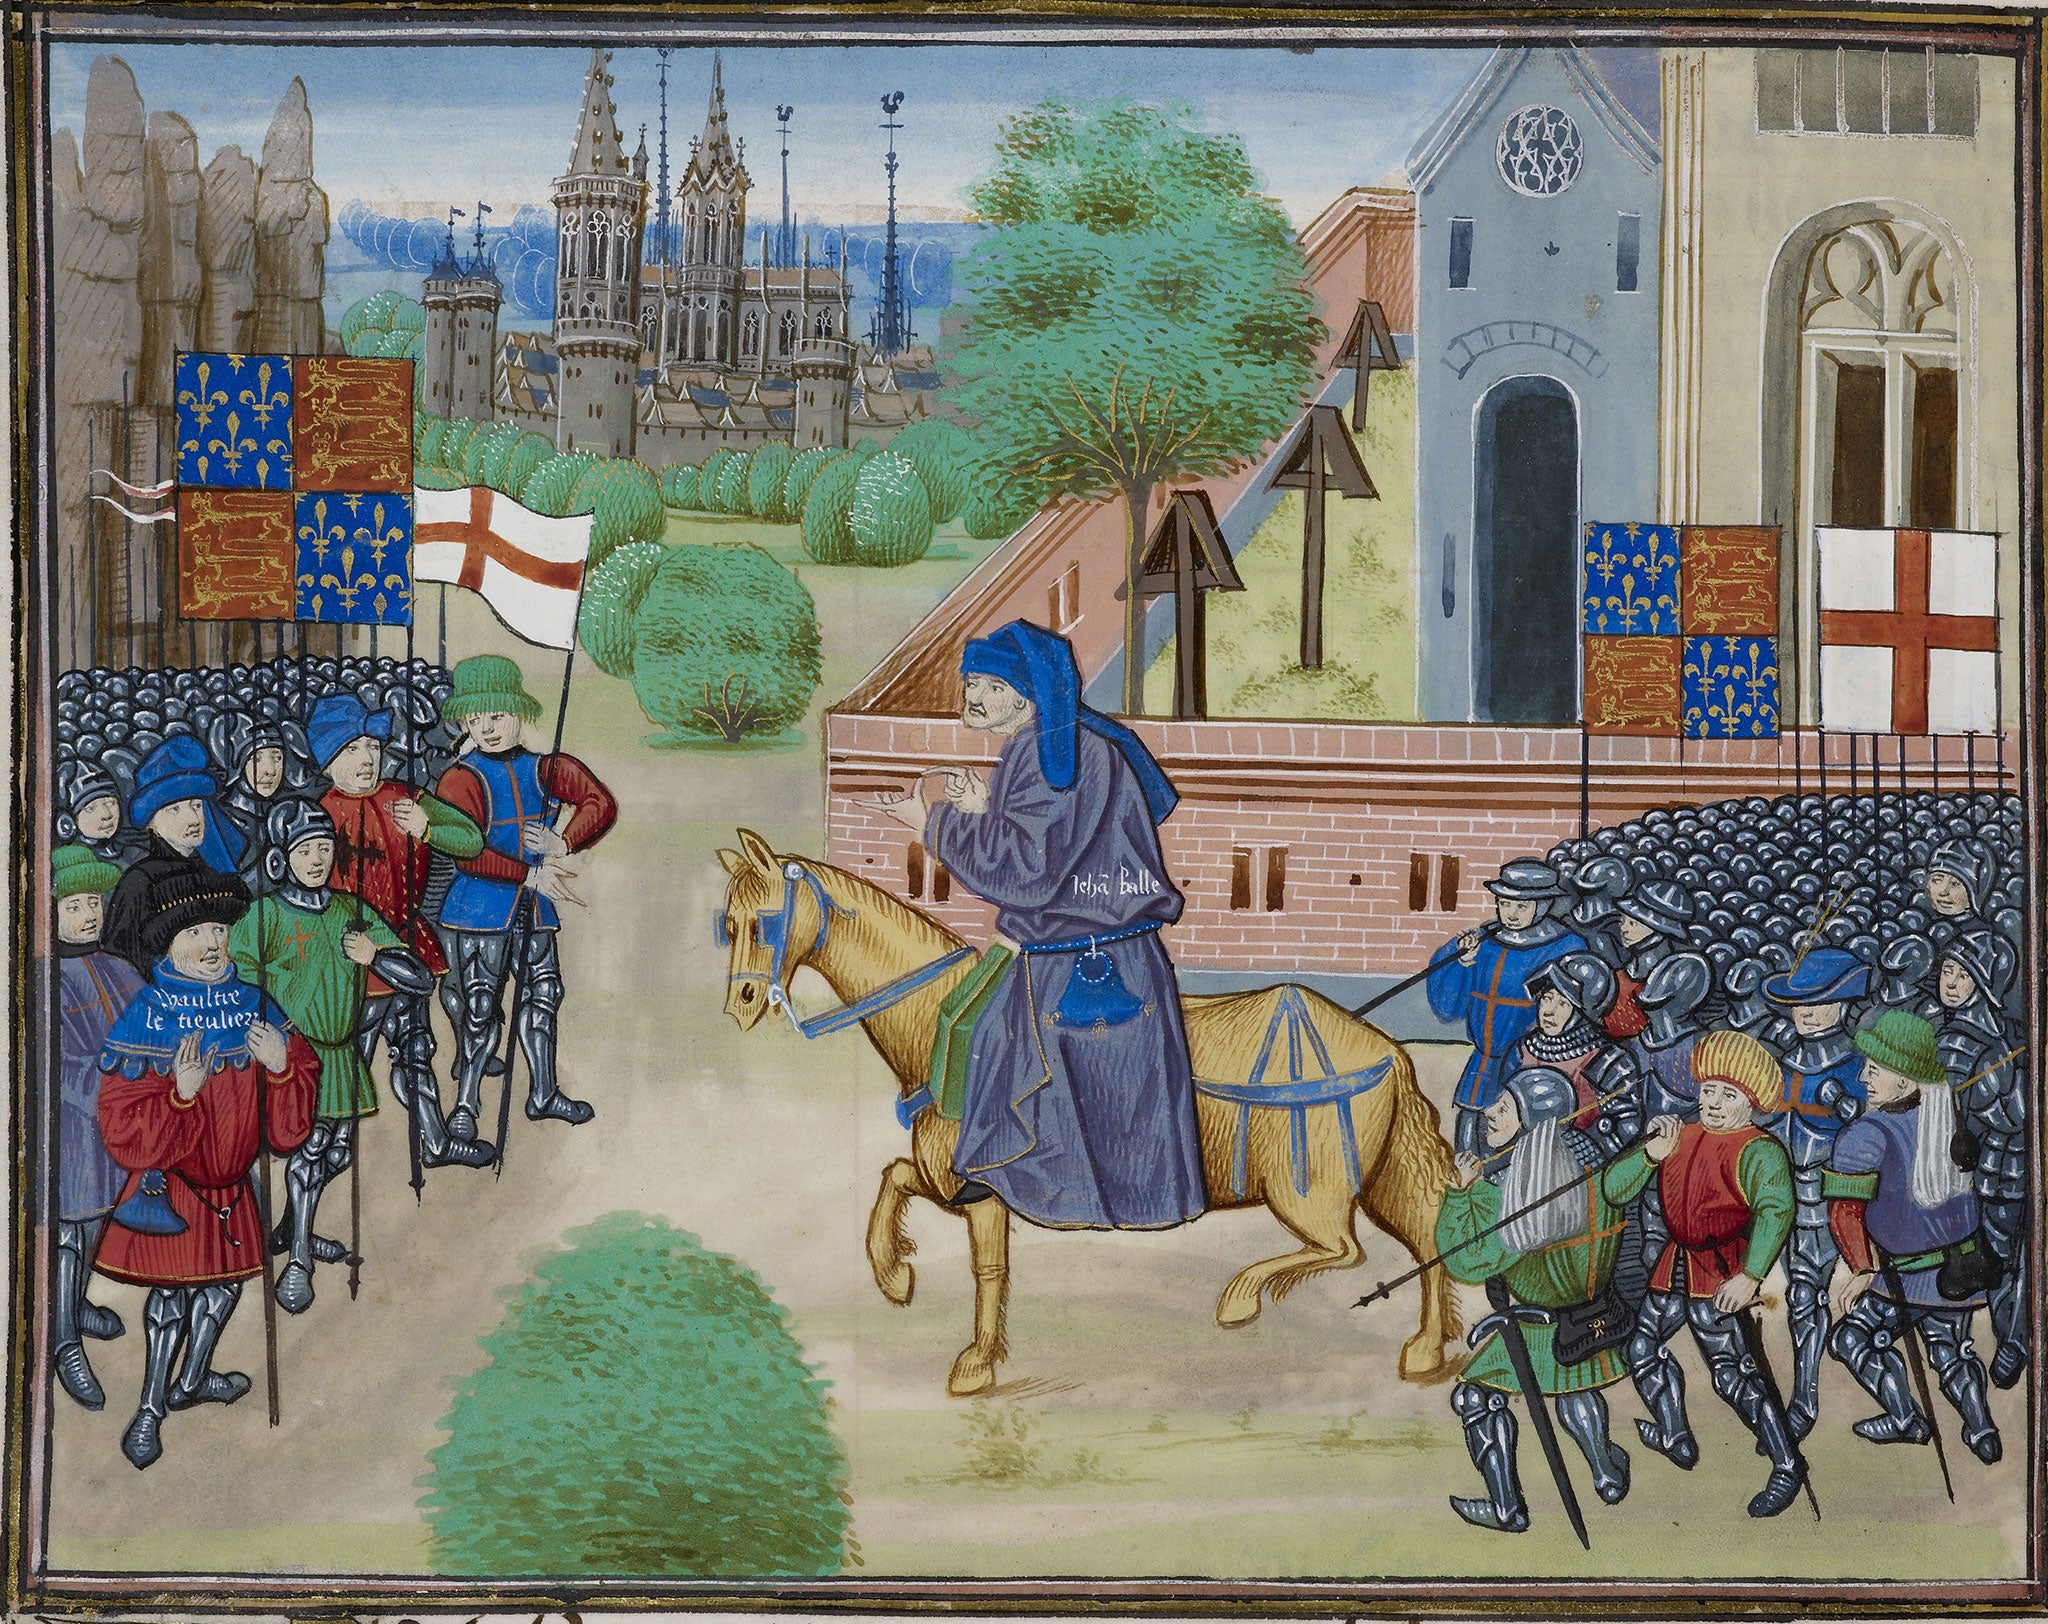 Power to the people: John Balle is credited as being the architect of the uprising in 1381